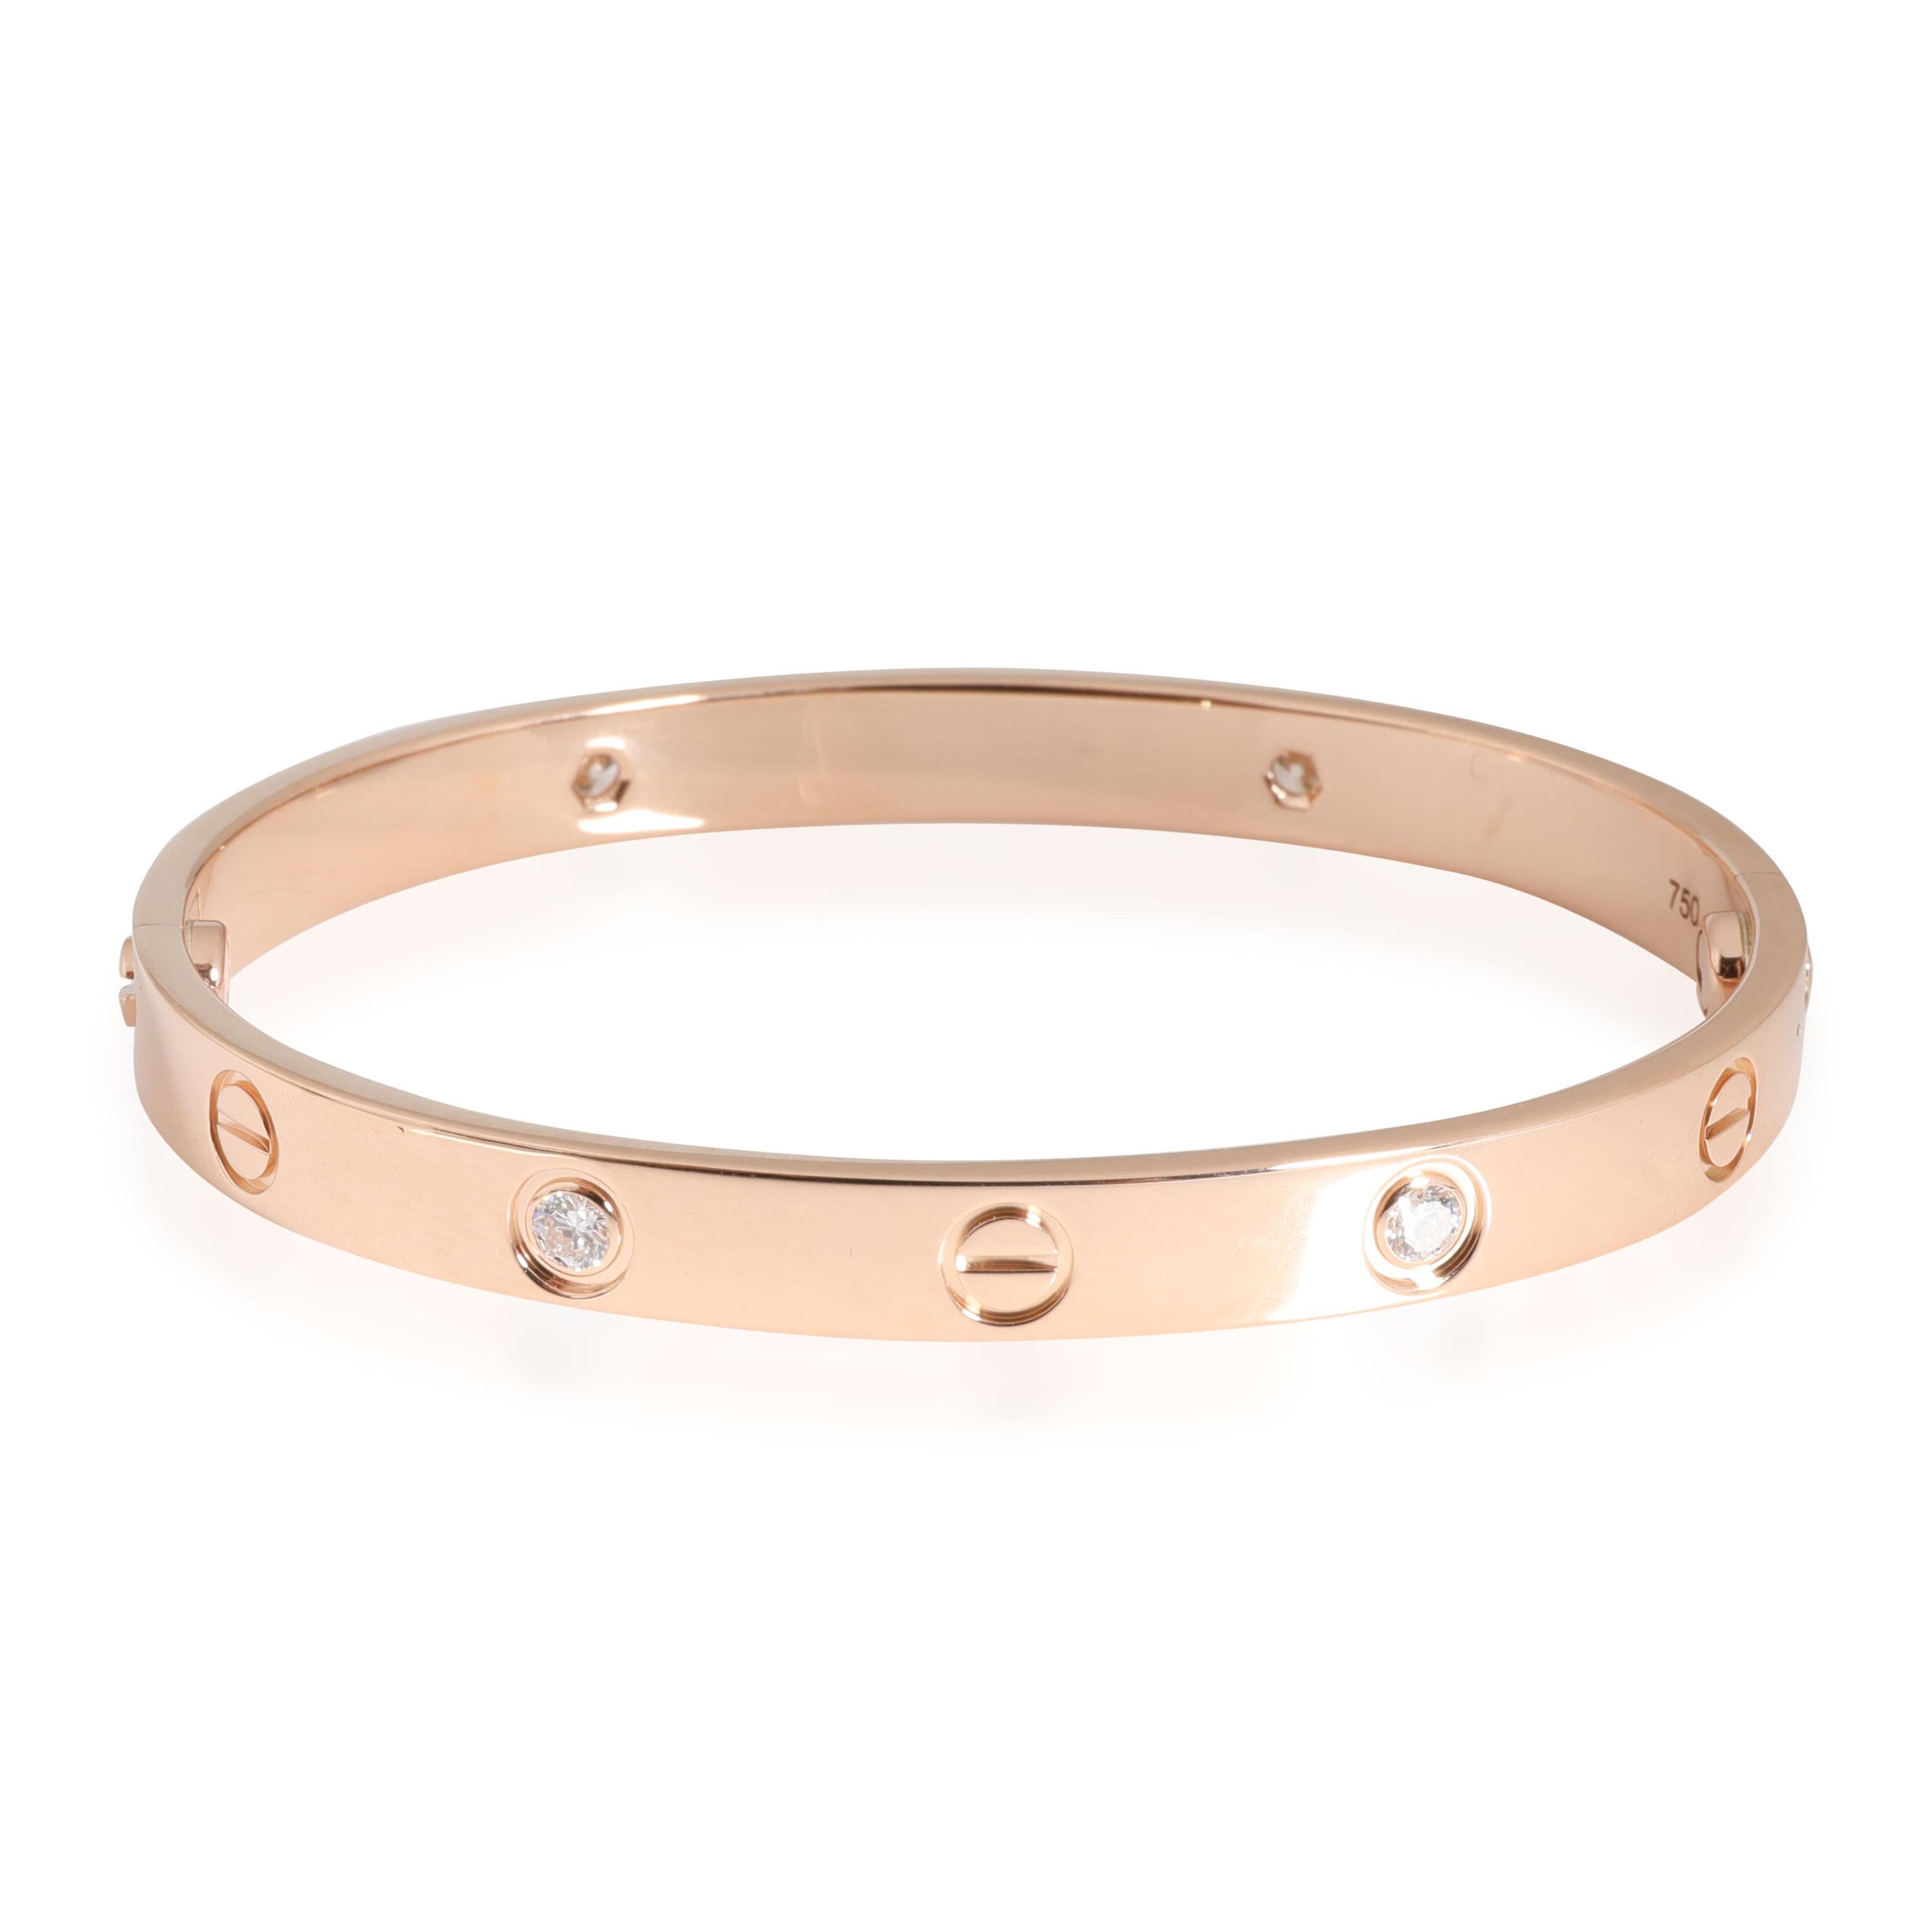 Cartier Love Diamond Bracelet in 18k Pink Gold 0.42 CTW

PRIMARY DETAILS
SKU: 114447
Listing Title: Cartier Love Diamond Bracelet in 18k Pink Gold 0.42 CTW
Condition Description: Retails for 11100 USD. In excellent condition and recently polished.